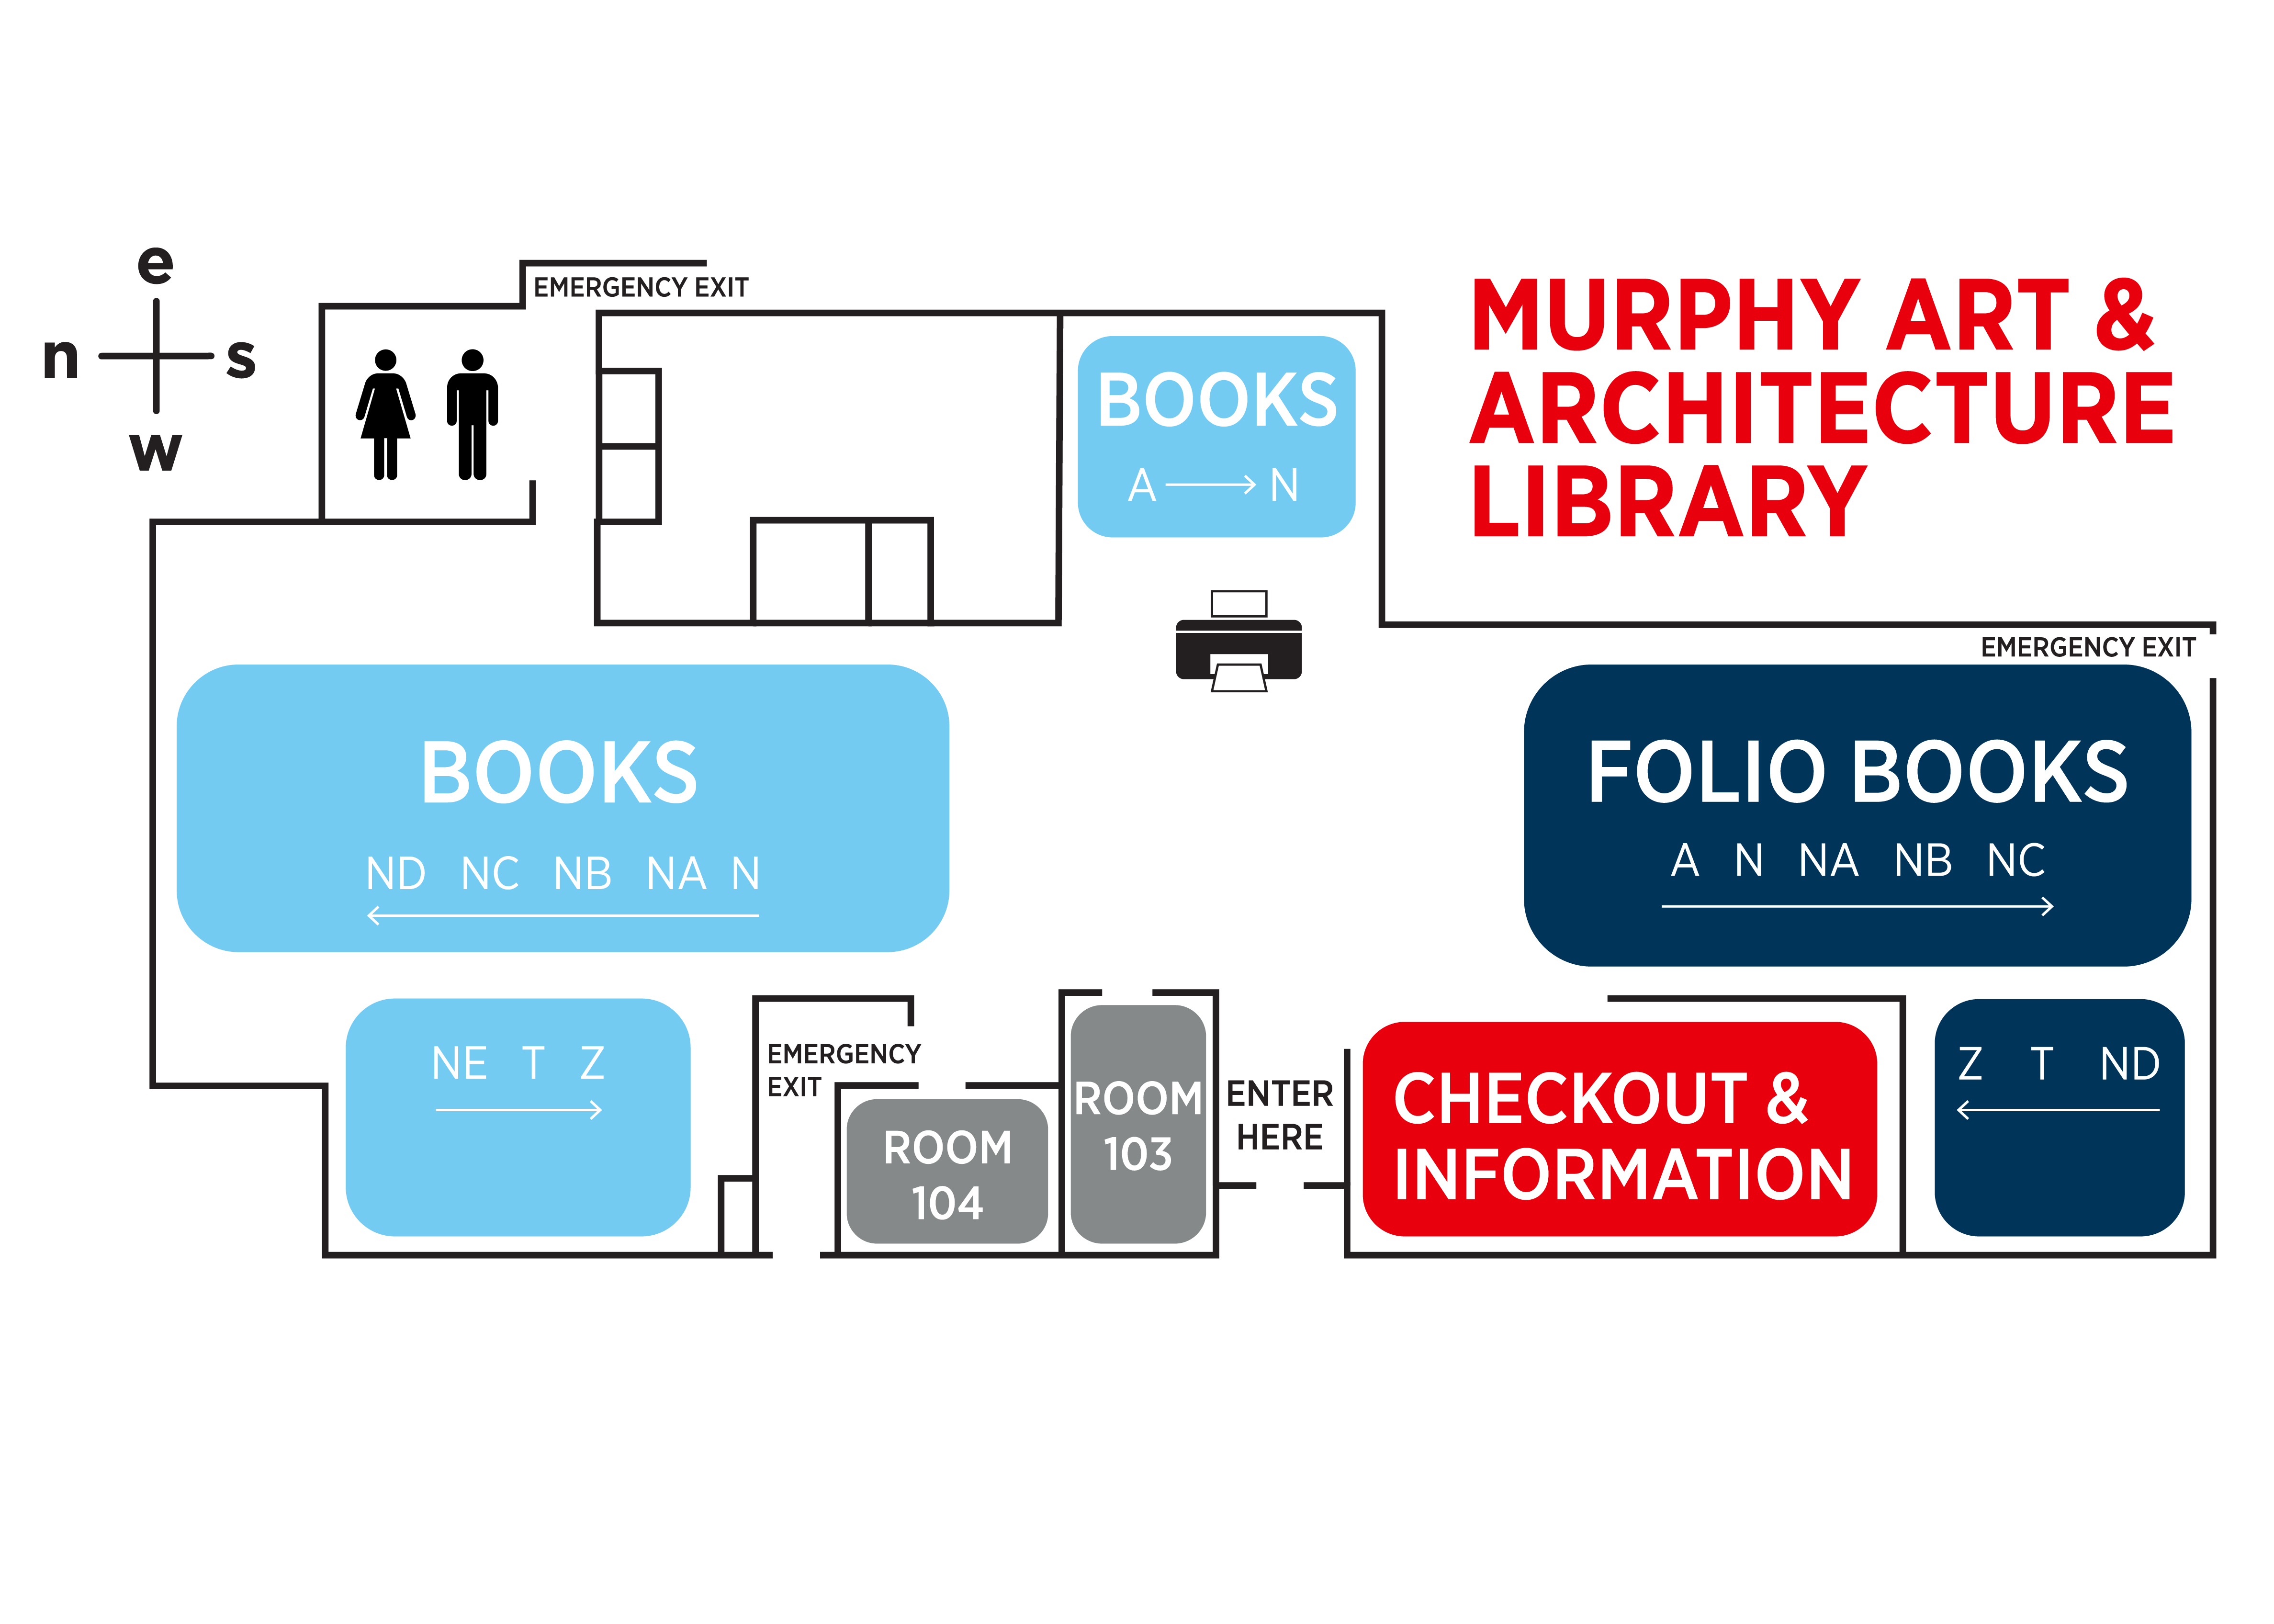 "Map of Art & Architecture Library layout"